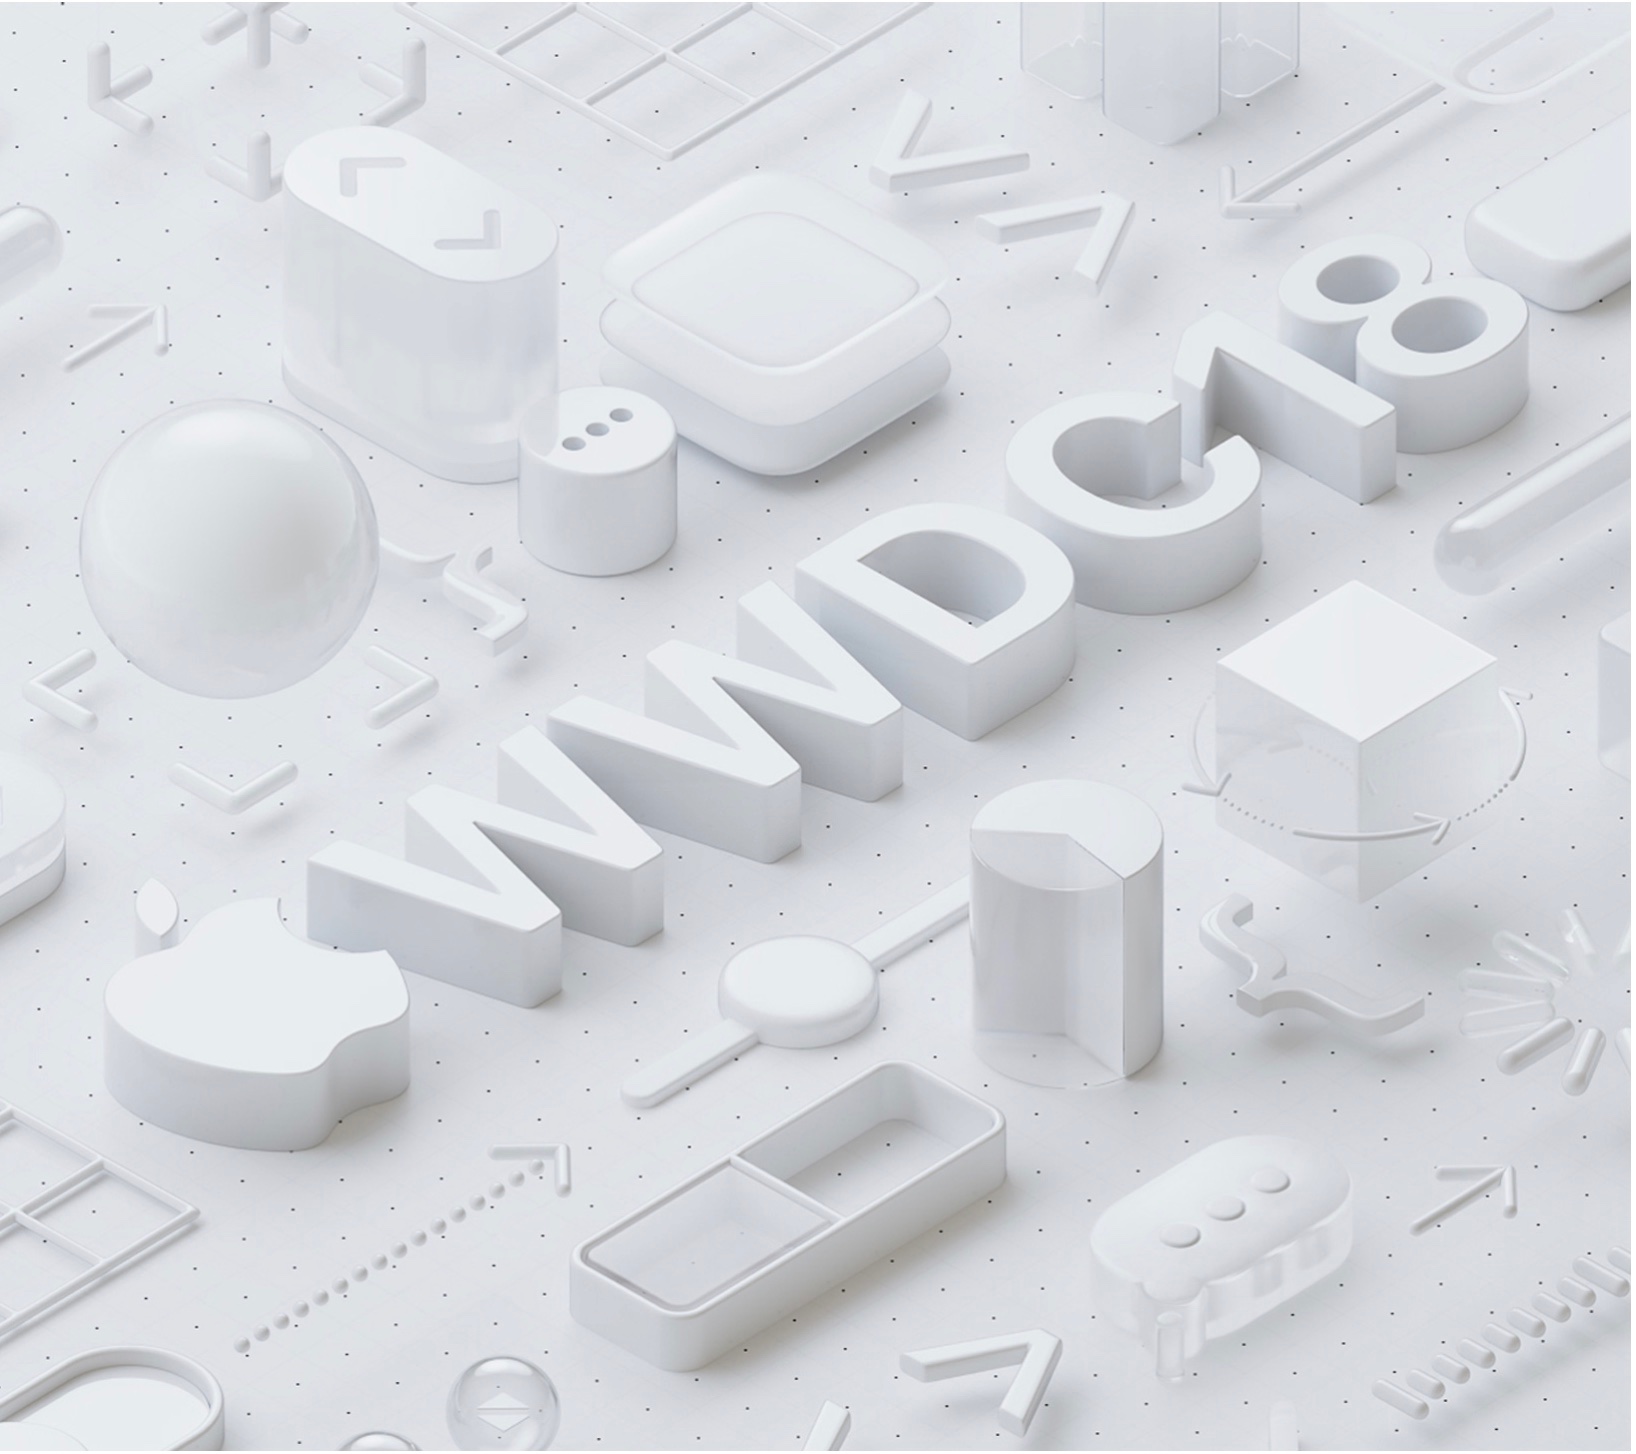 Apple posts video transcripts from WWDC